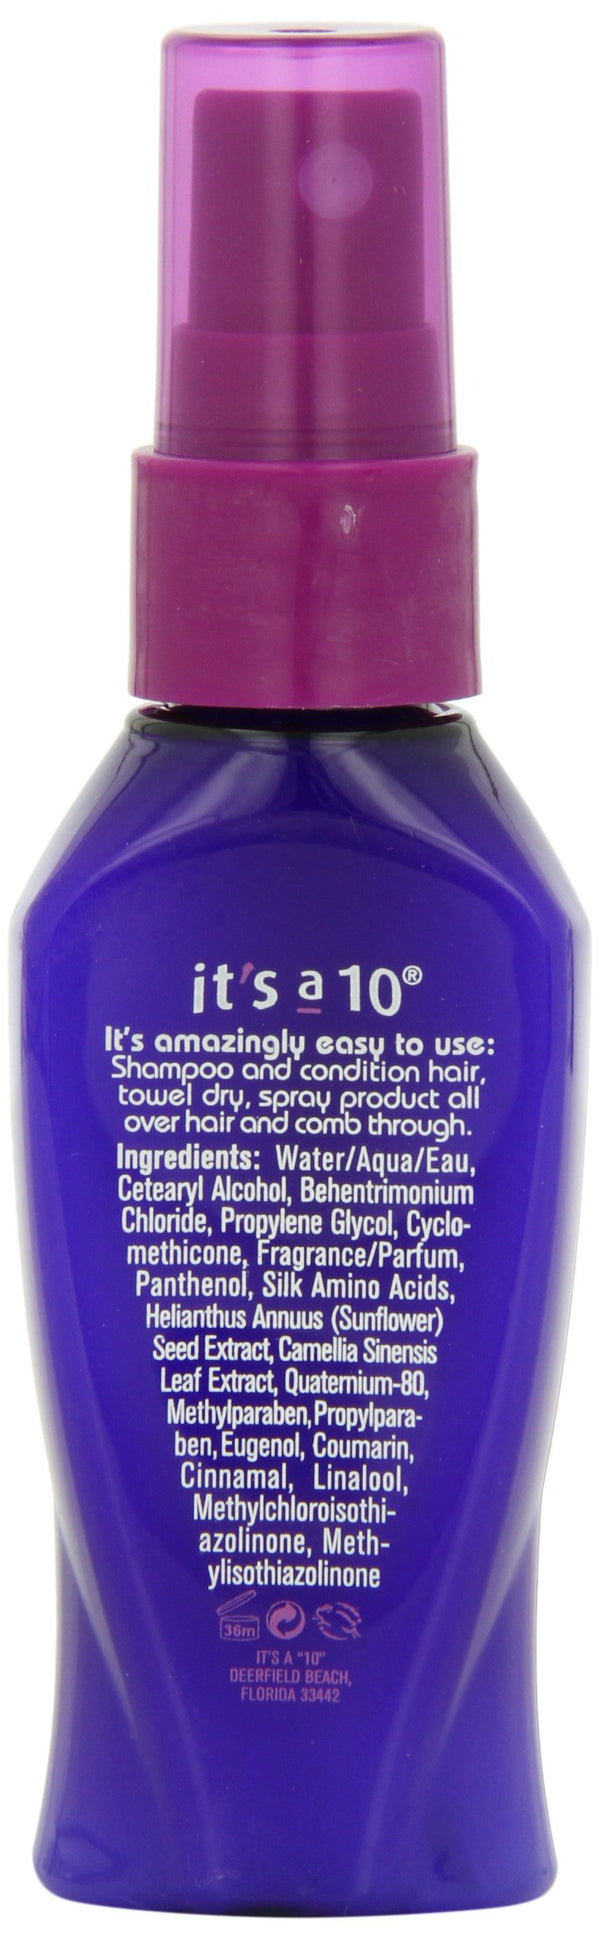 It's a Ten Miracle Leave-In Spray, 2 oz